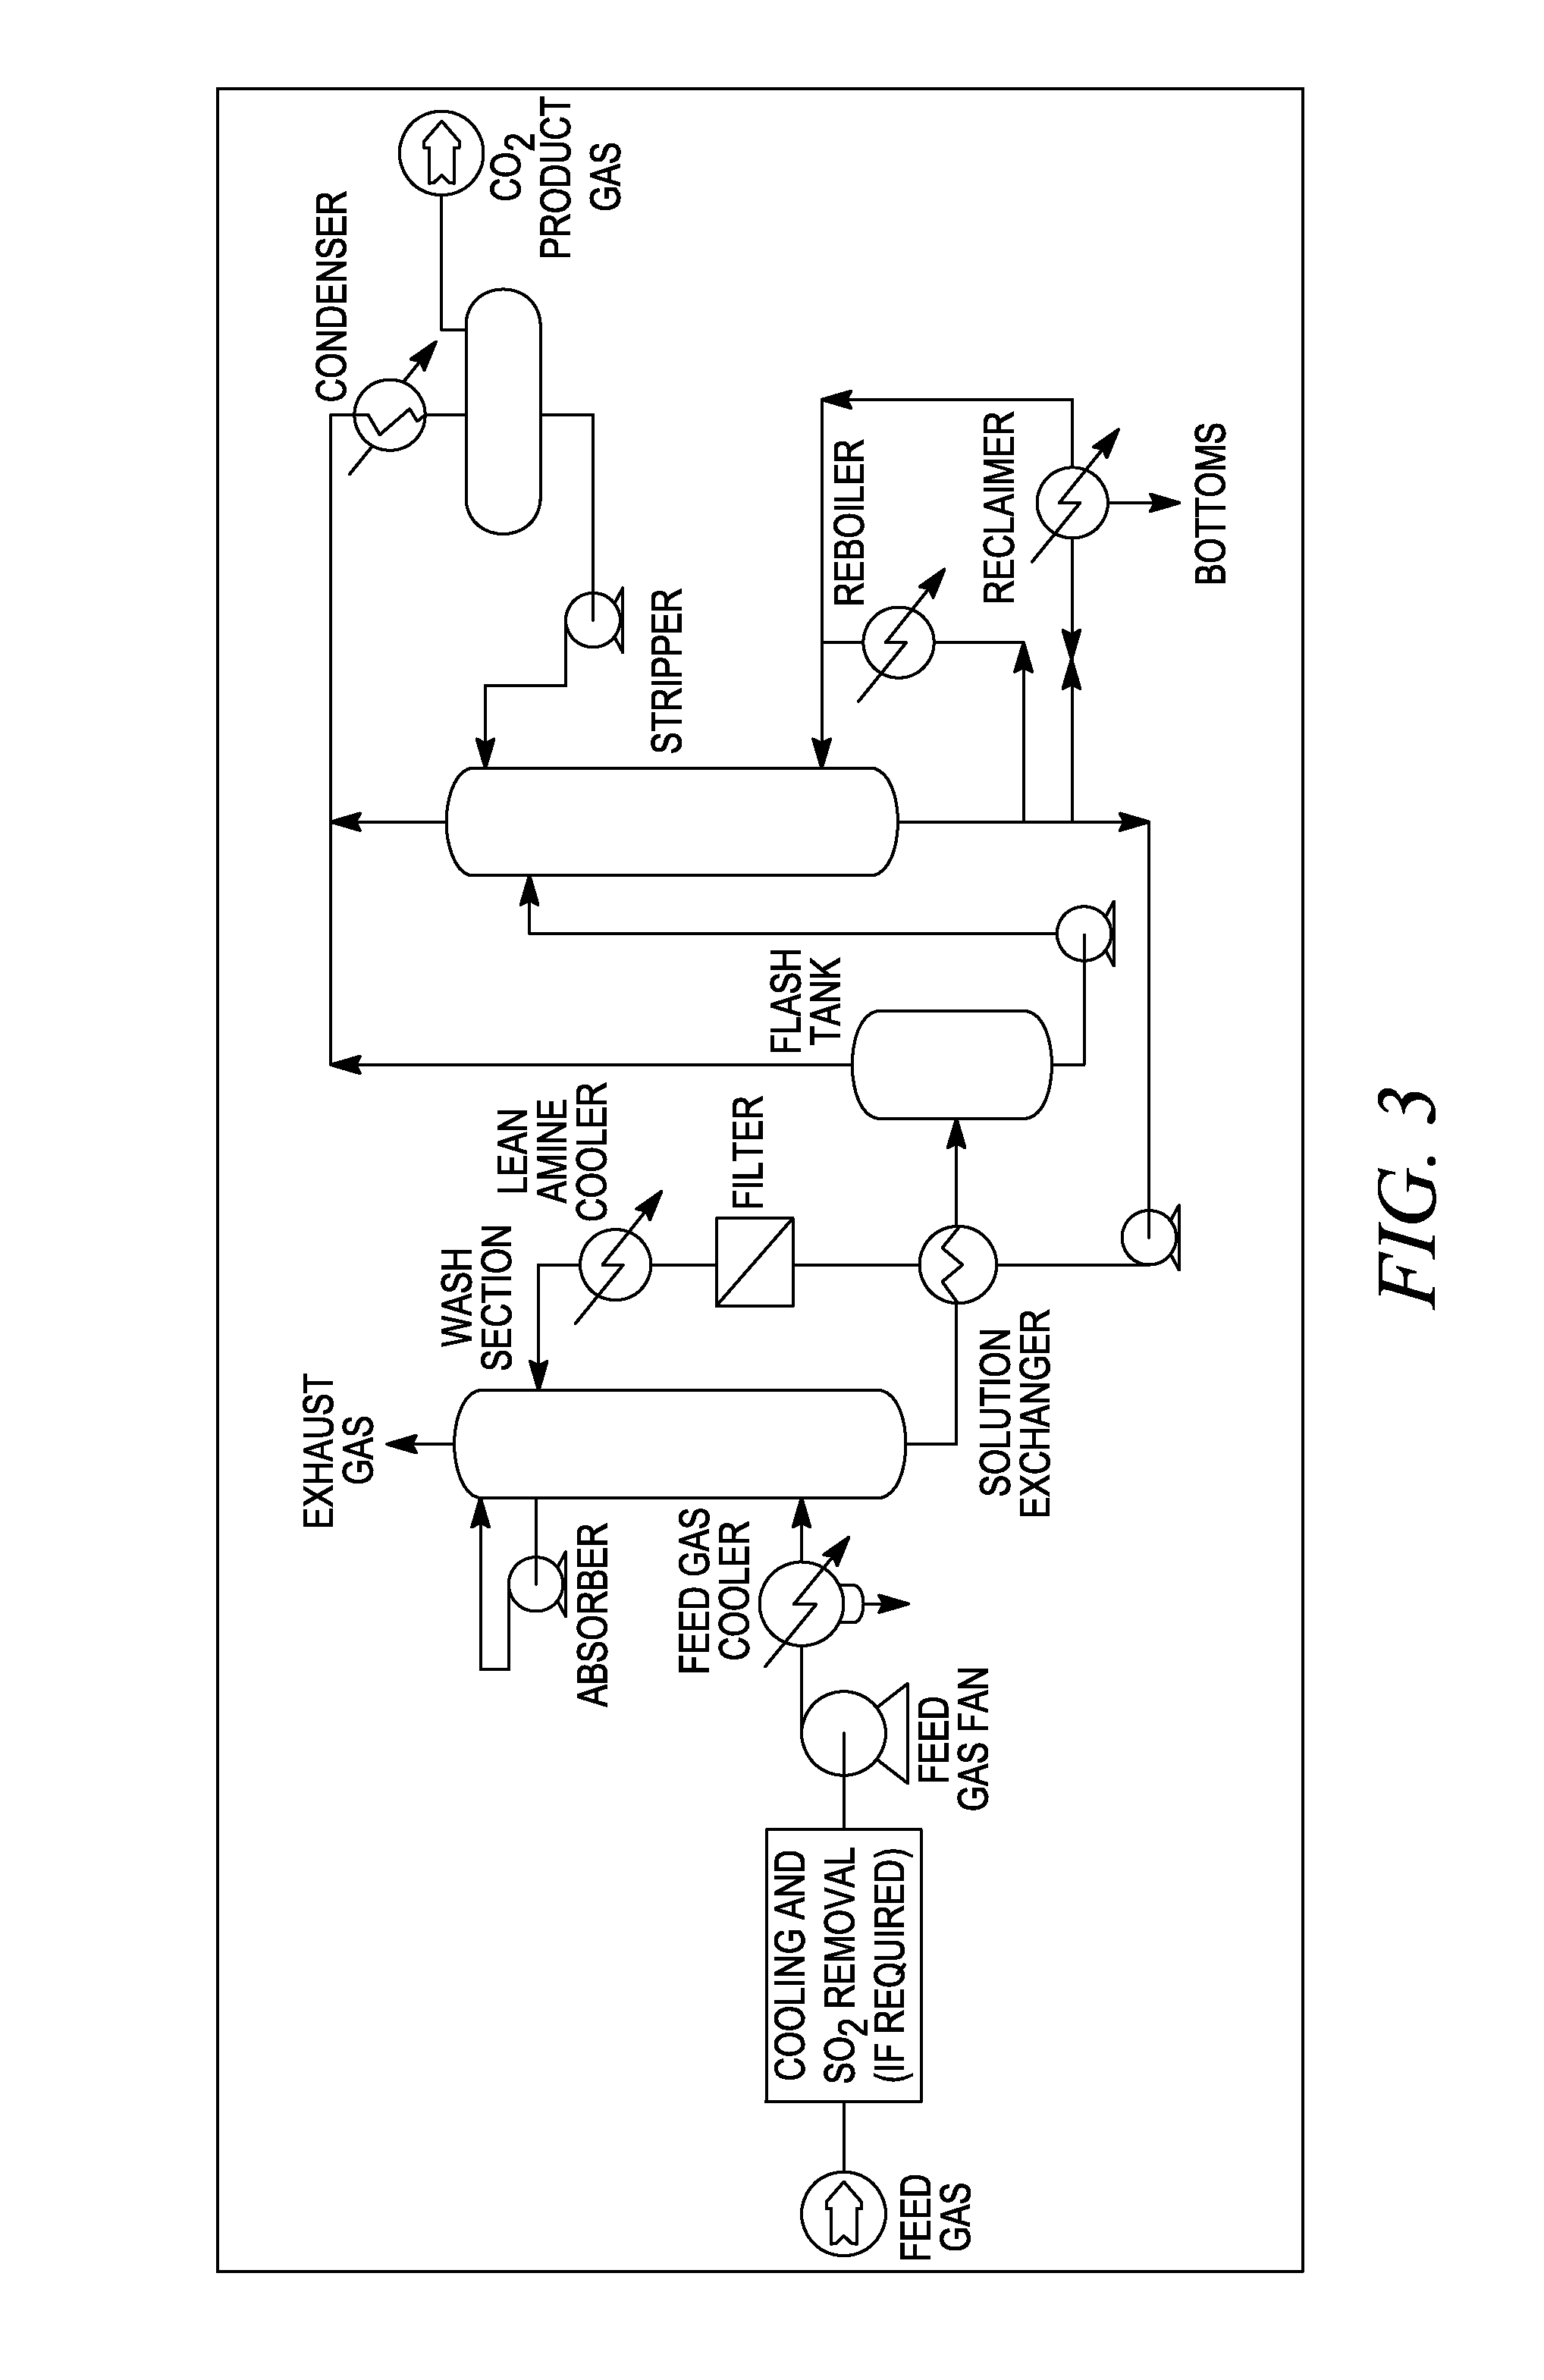 Method and apparatus for using pressure cycling and cold liquid co2 for releasing natural gas from coal and shale formations